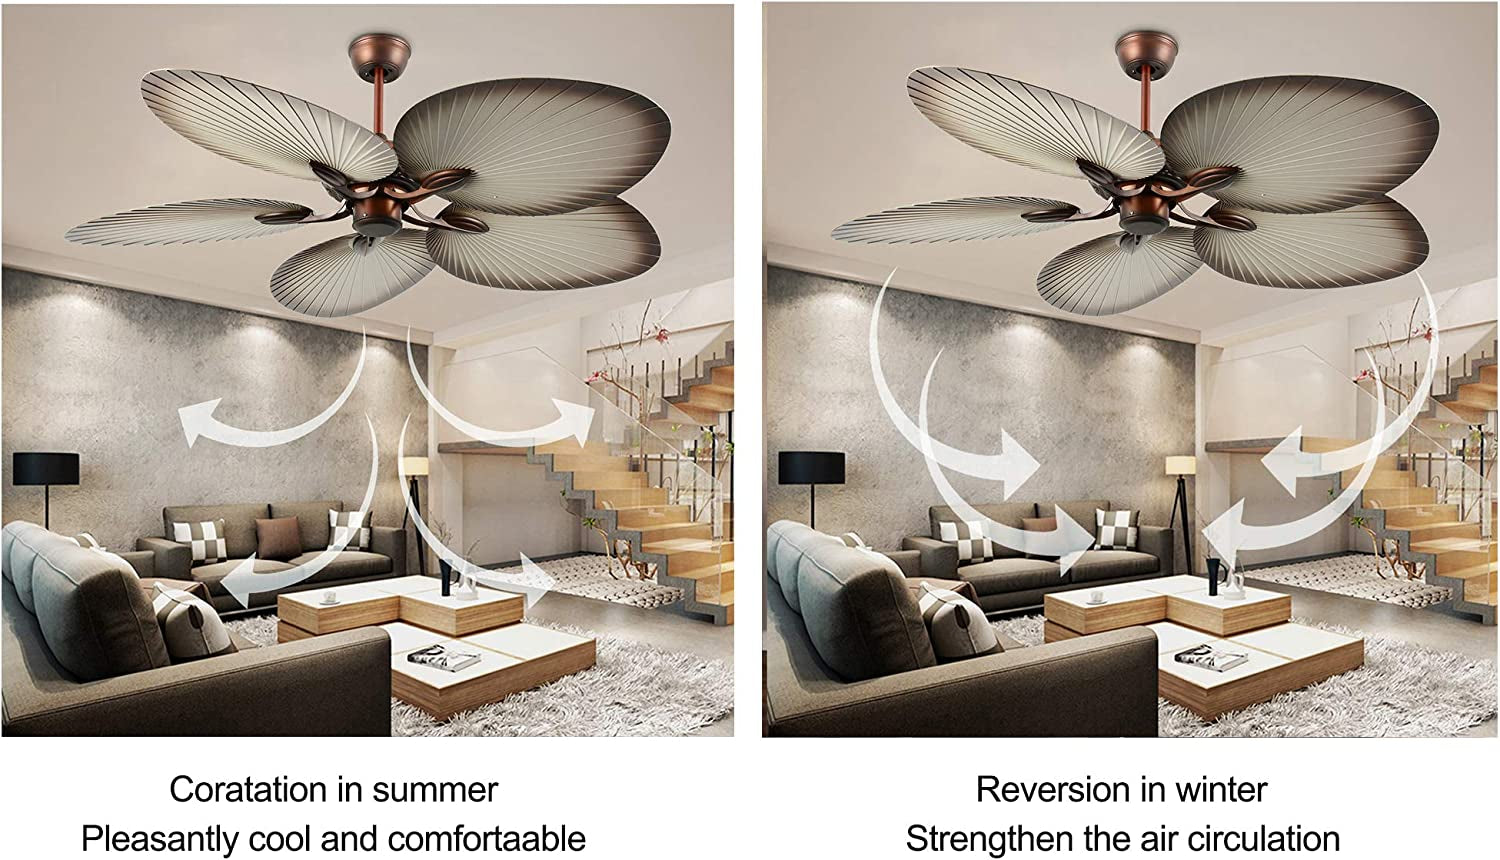 Whmetal Cover 52 Inch Tropical Ceiling Fan with Remote Control, 5 ABS Damp Rated Palm Blades for Indoor, Outdoor(Brown)